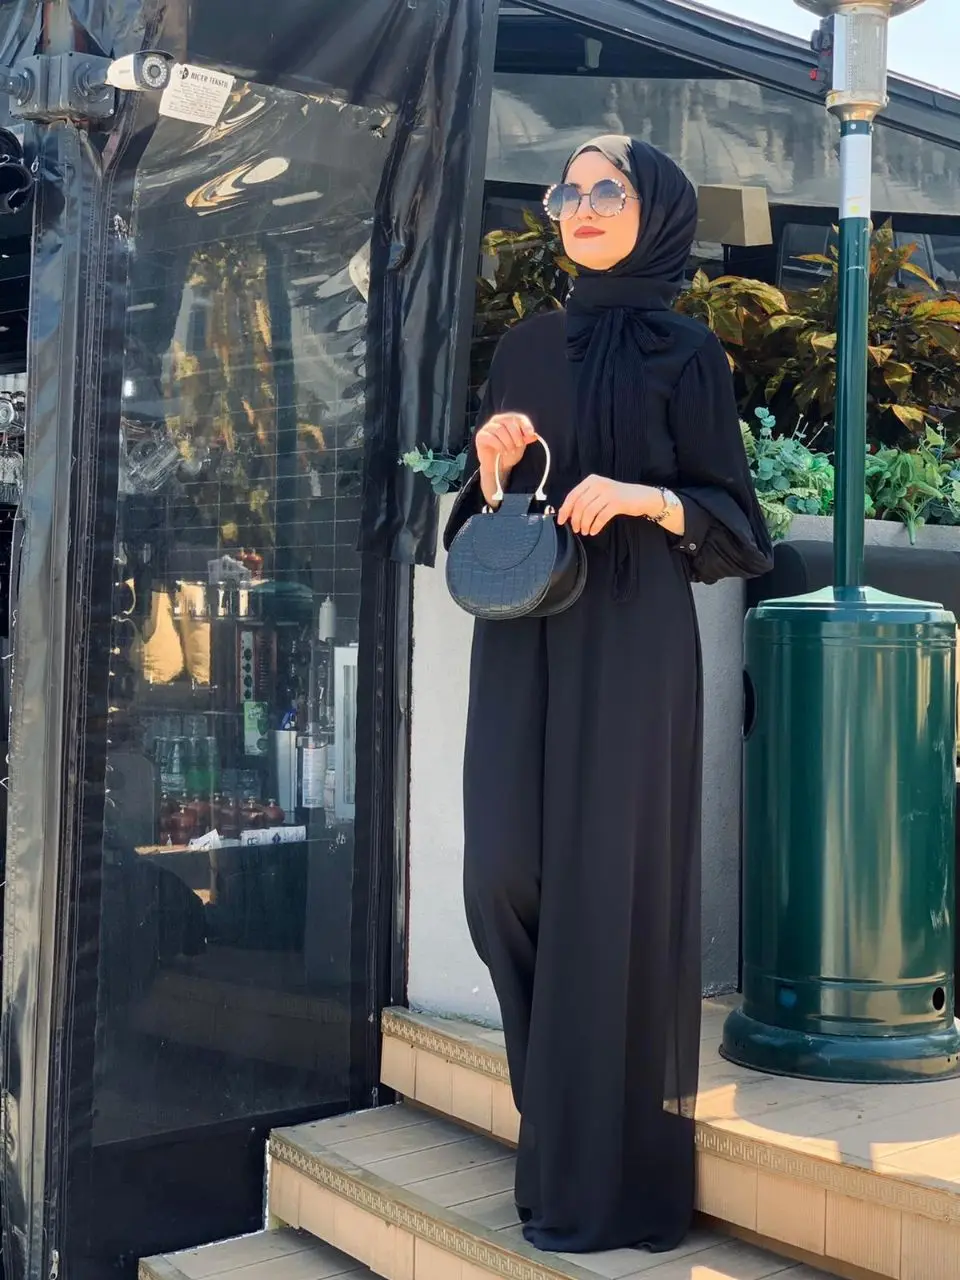 Women's for Dress Overalls Clothing Jumpsuit Pleated Sleeves and Neckline One Piece Turkey Spring 2021 Muslim Fashion Islam